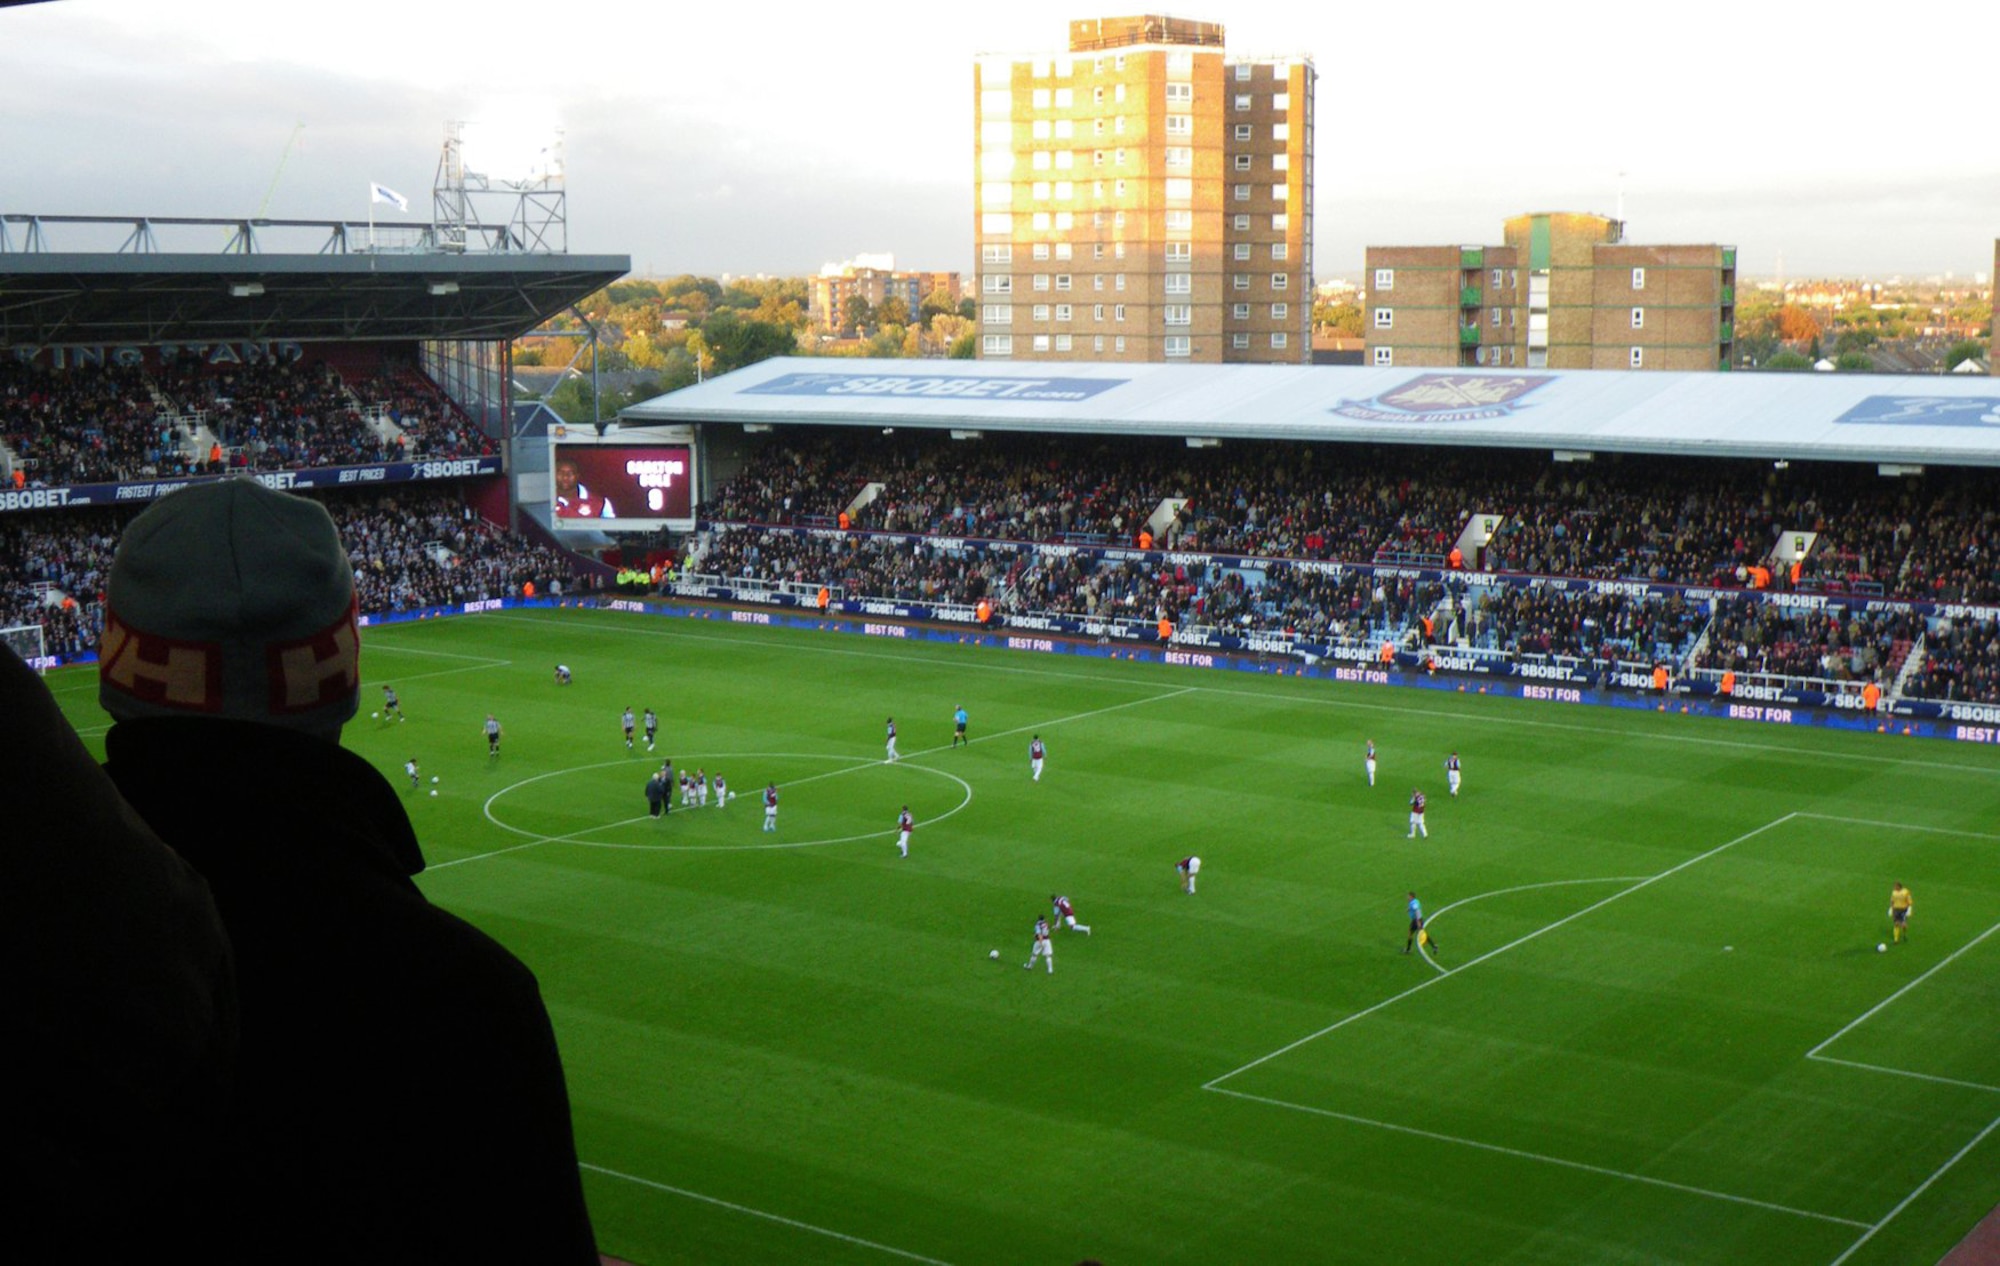 West Ham United Football Club takes on Newcastle United Oct 24, 2010 at Boleyn Ground in Upton Park, London. Newcastle won the match 2-1. (U.S. Air Force photo/Tech. Sgt. Kevin Wallace)